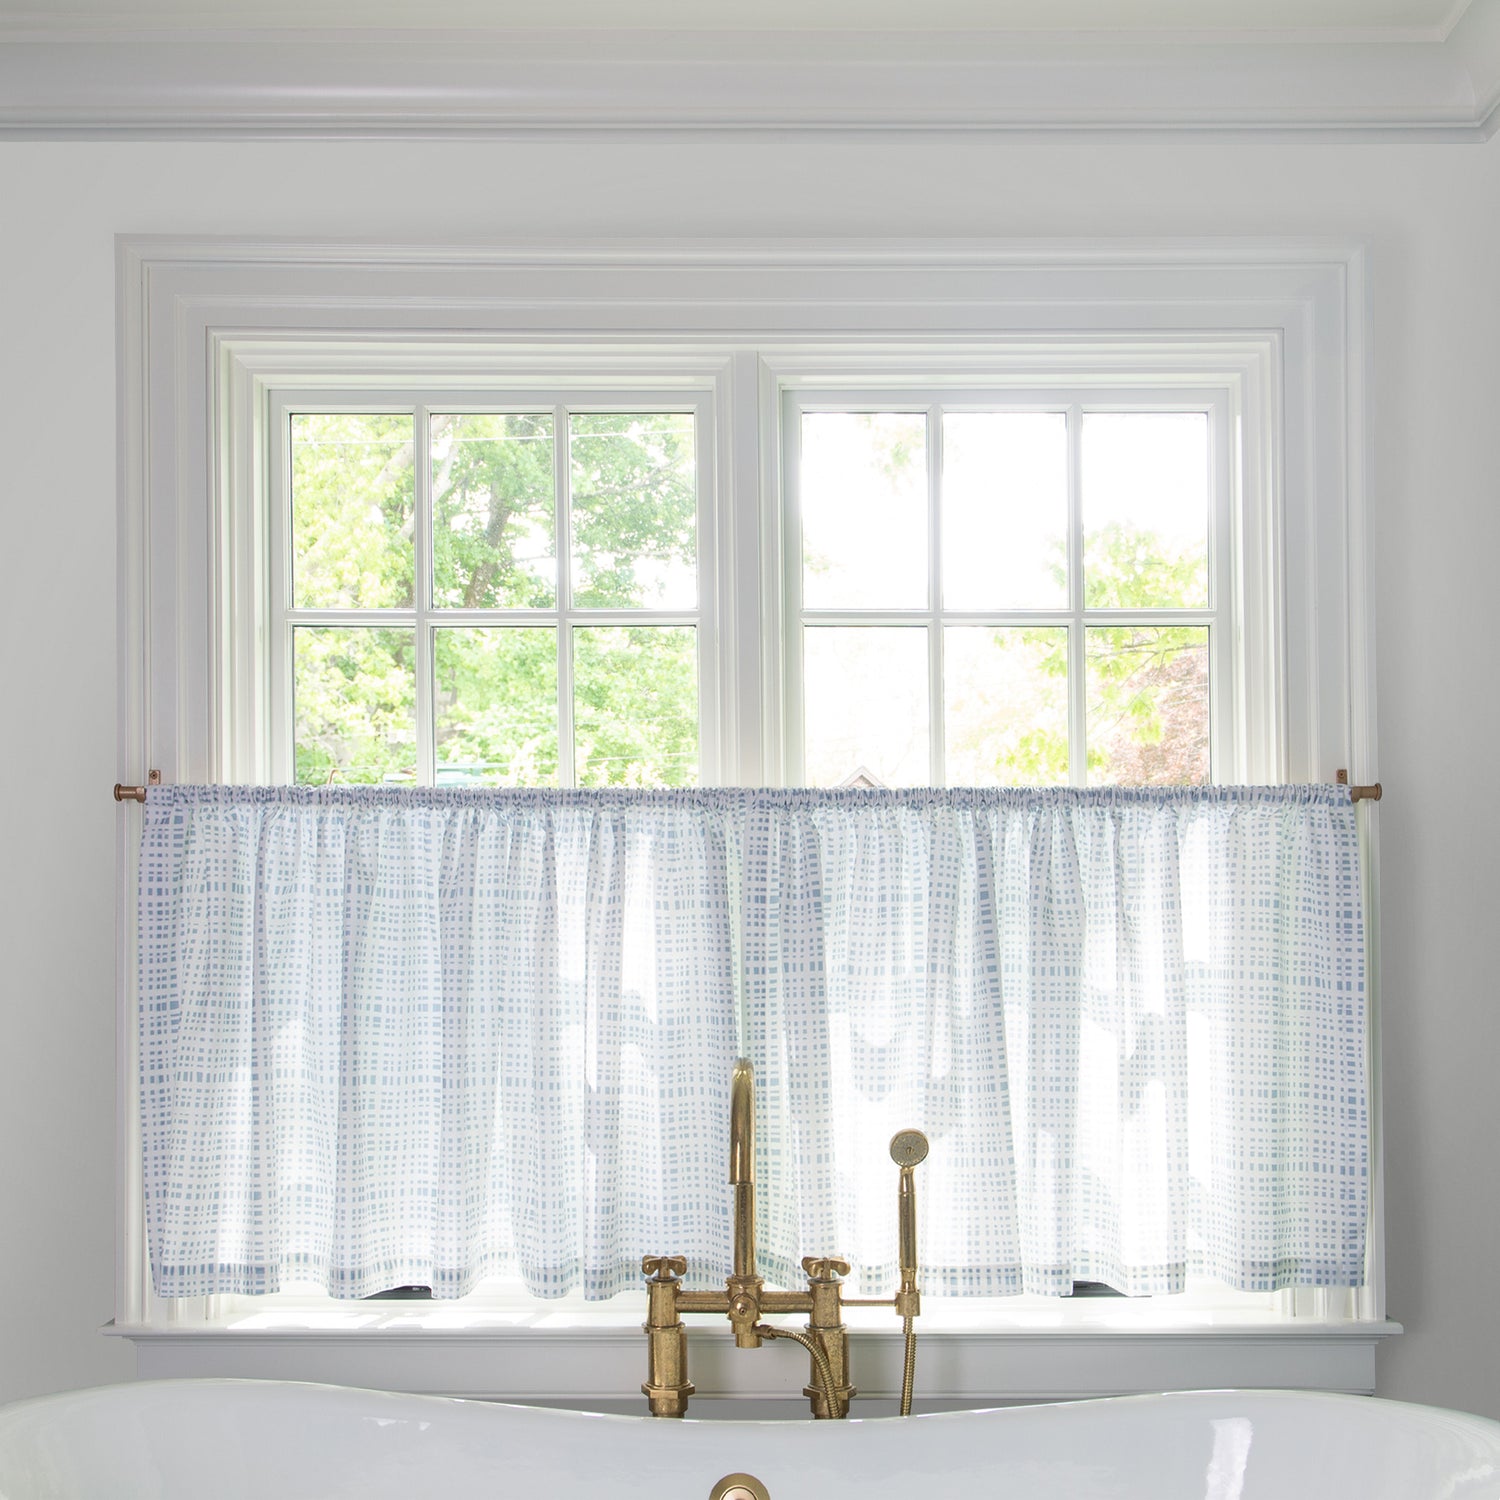 Sky Blue Gingham Printed Cotton fabric curtain on a metal rod in front of an illuminated window in a bathroom